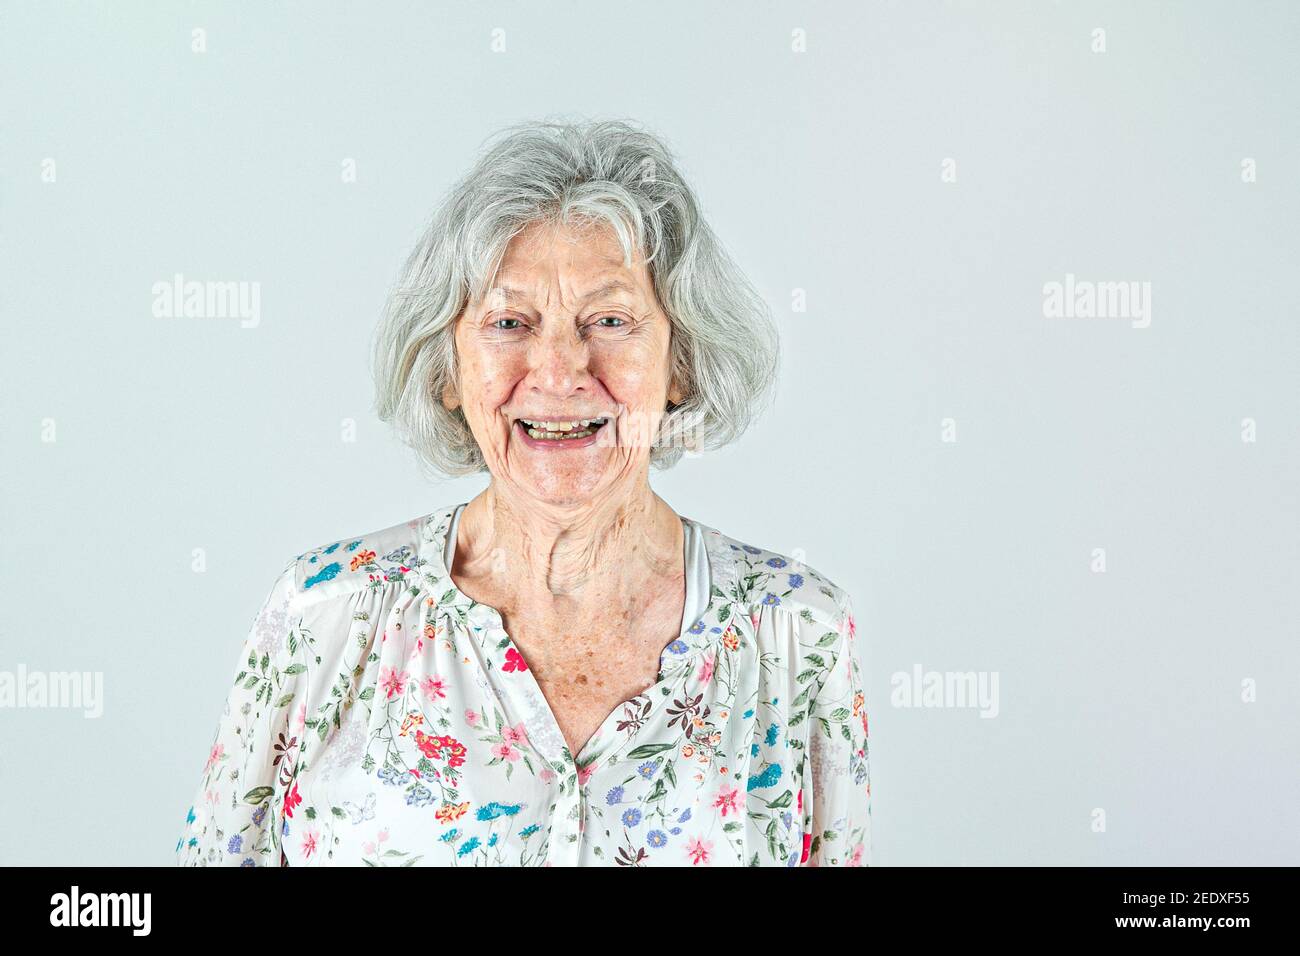 Elderly woman in her 80's with Gray hair isolated on a white backdrop smiling and laughing and happy. Stock Photo